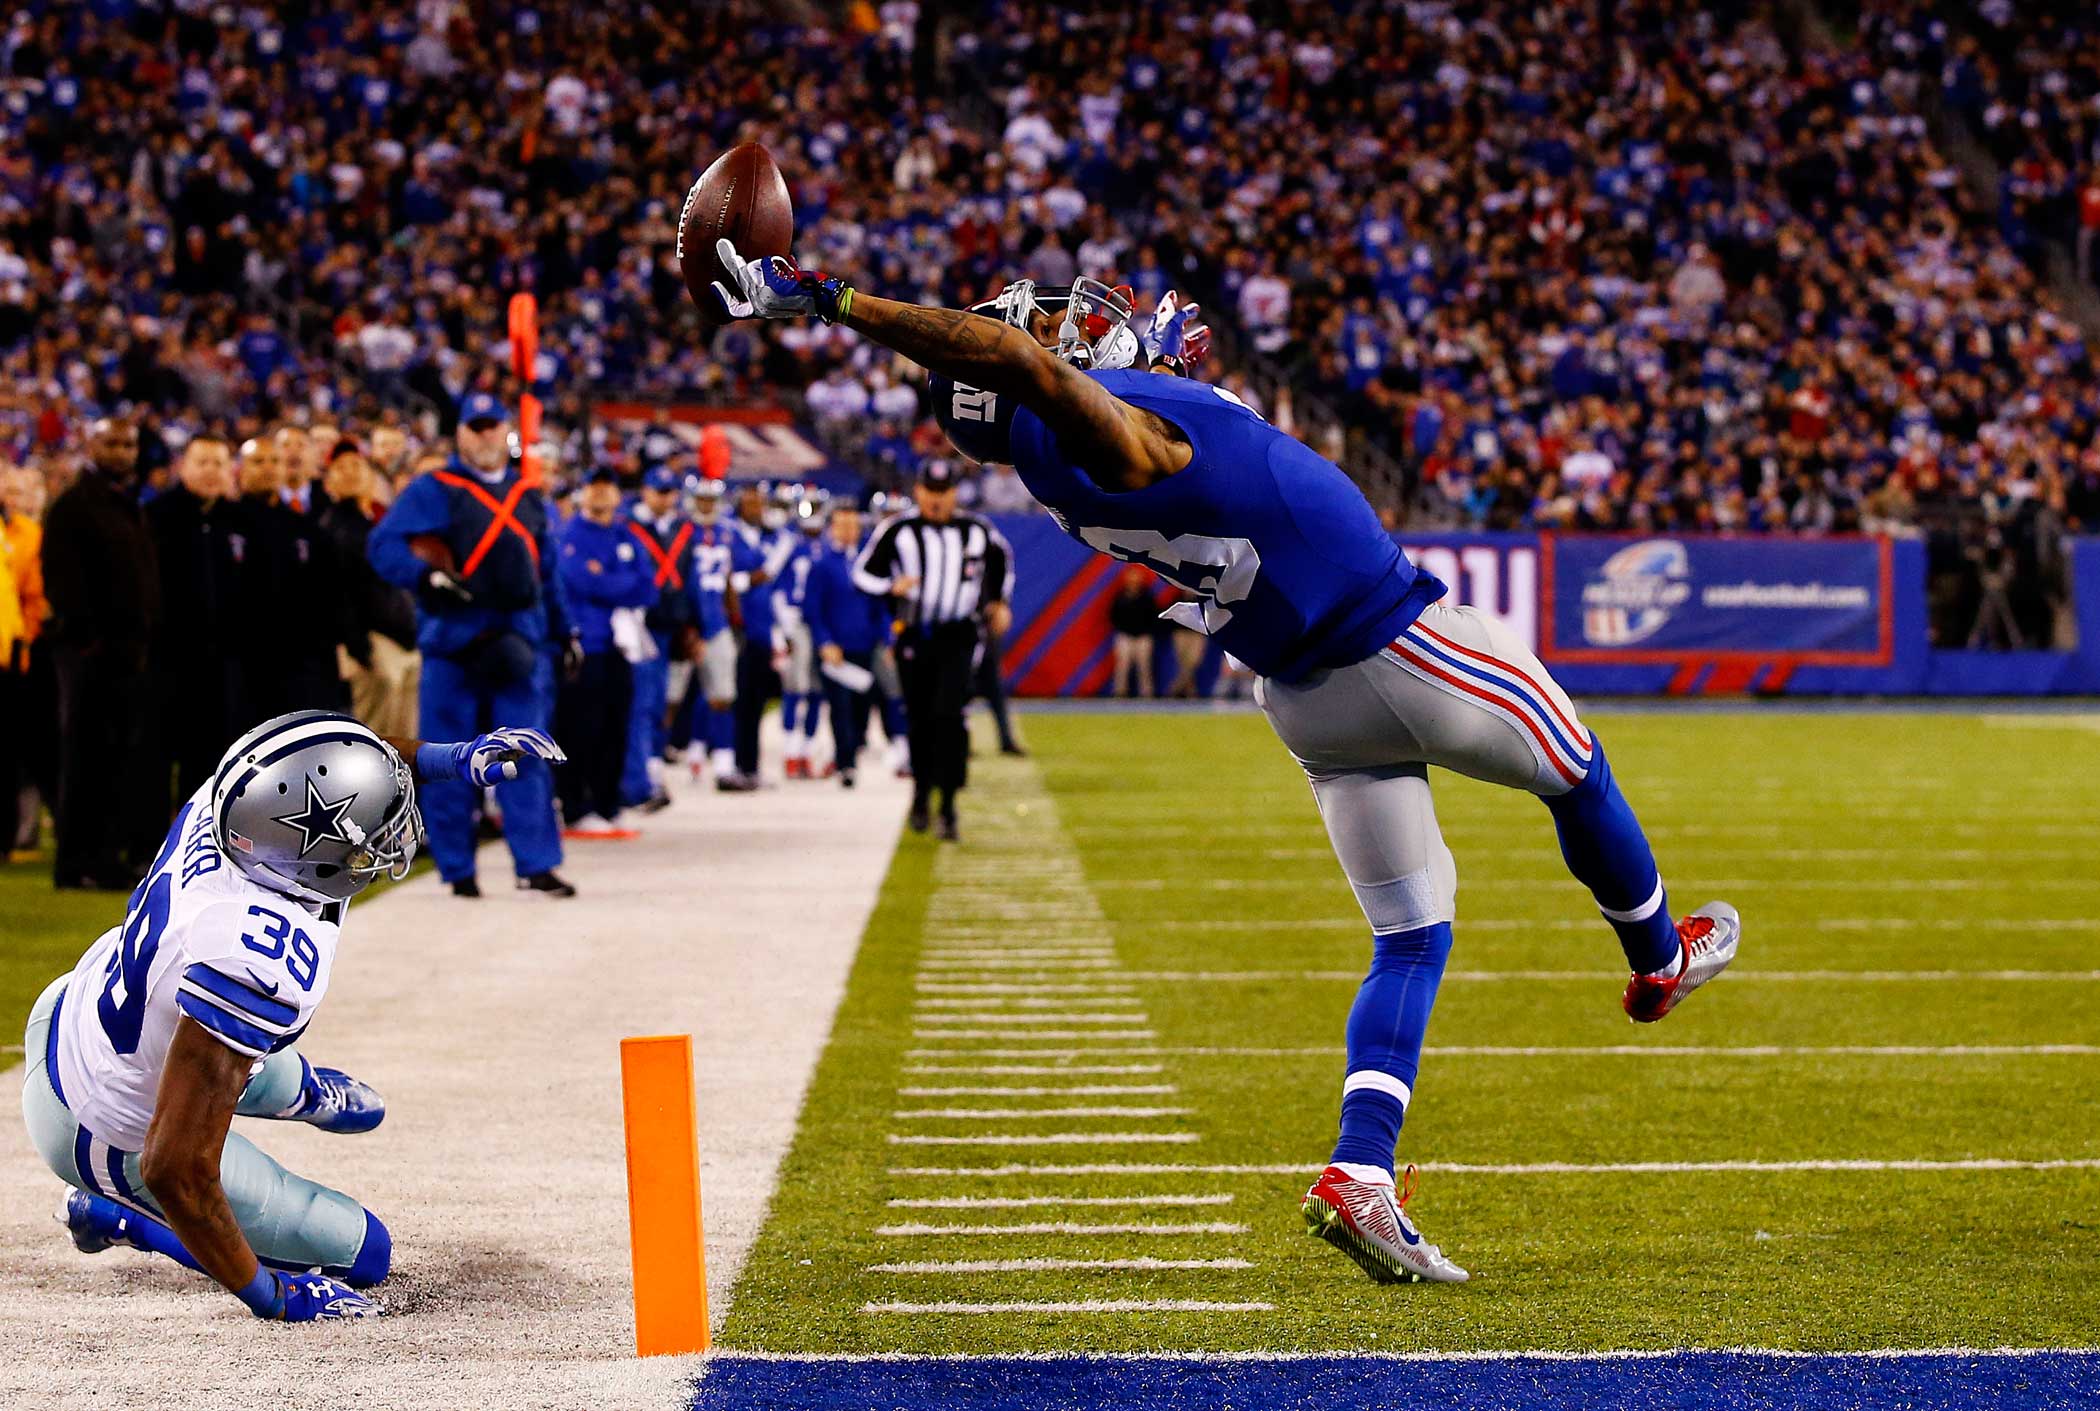 Odell Beckham of the New York Giants scores a touchdown in the second quarter against the Dallas Cowboys at [f500link]MetLife[/f500link] Stadium on Nov. 23, 2014 in East Rutherford, New Jersey. (Al Bello—Getty Images)